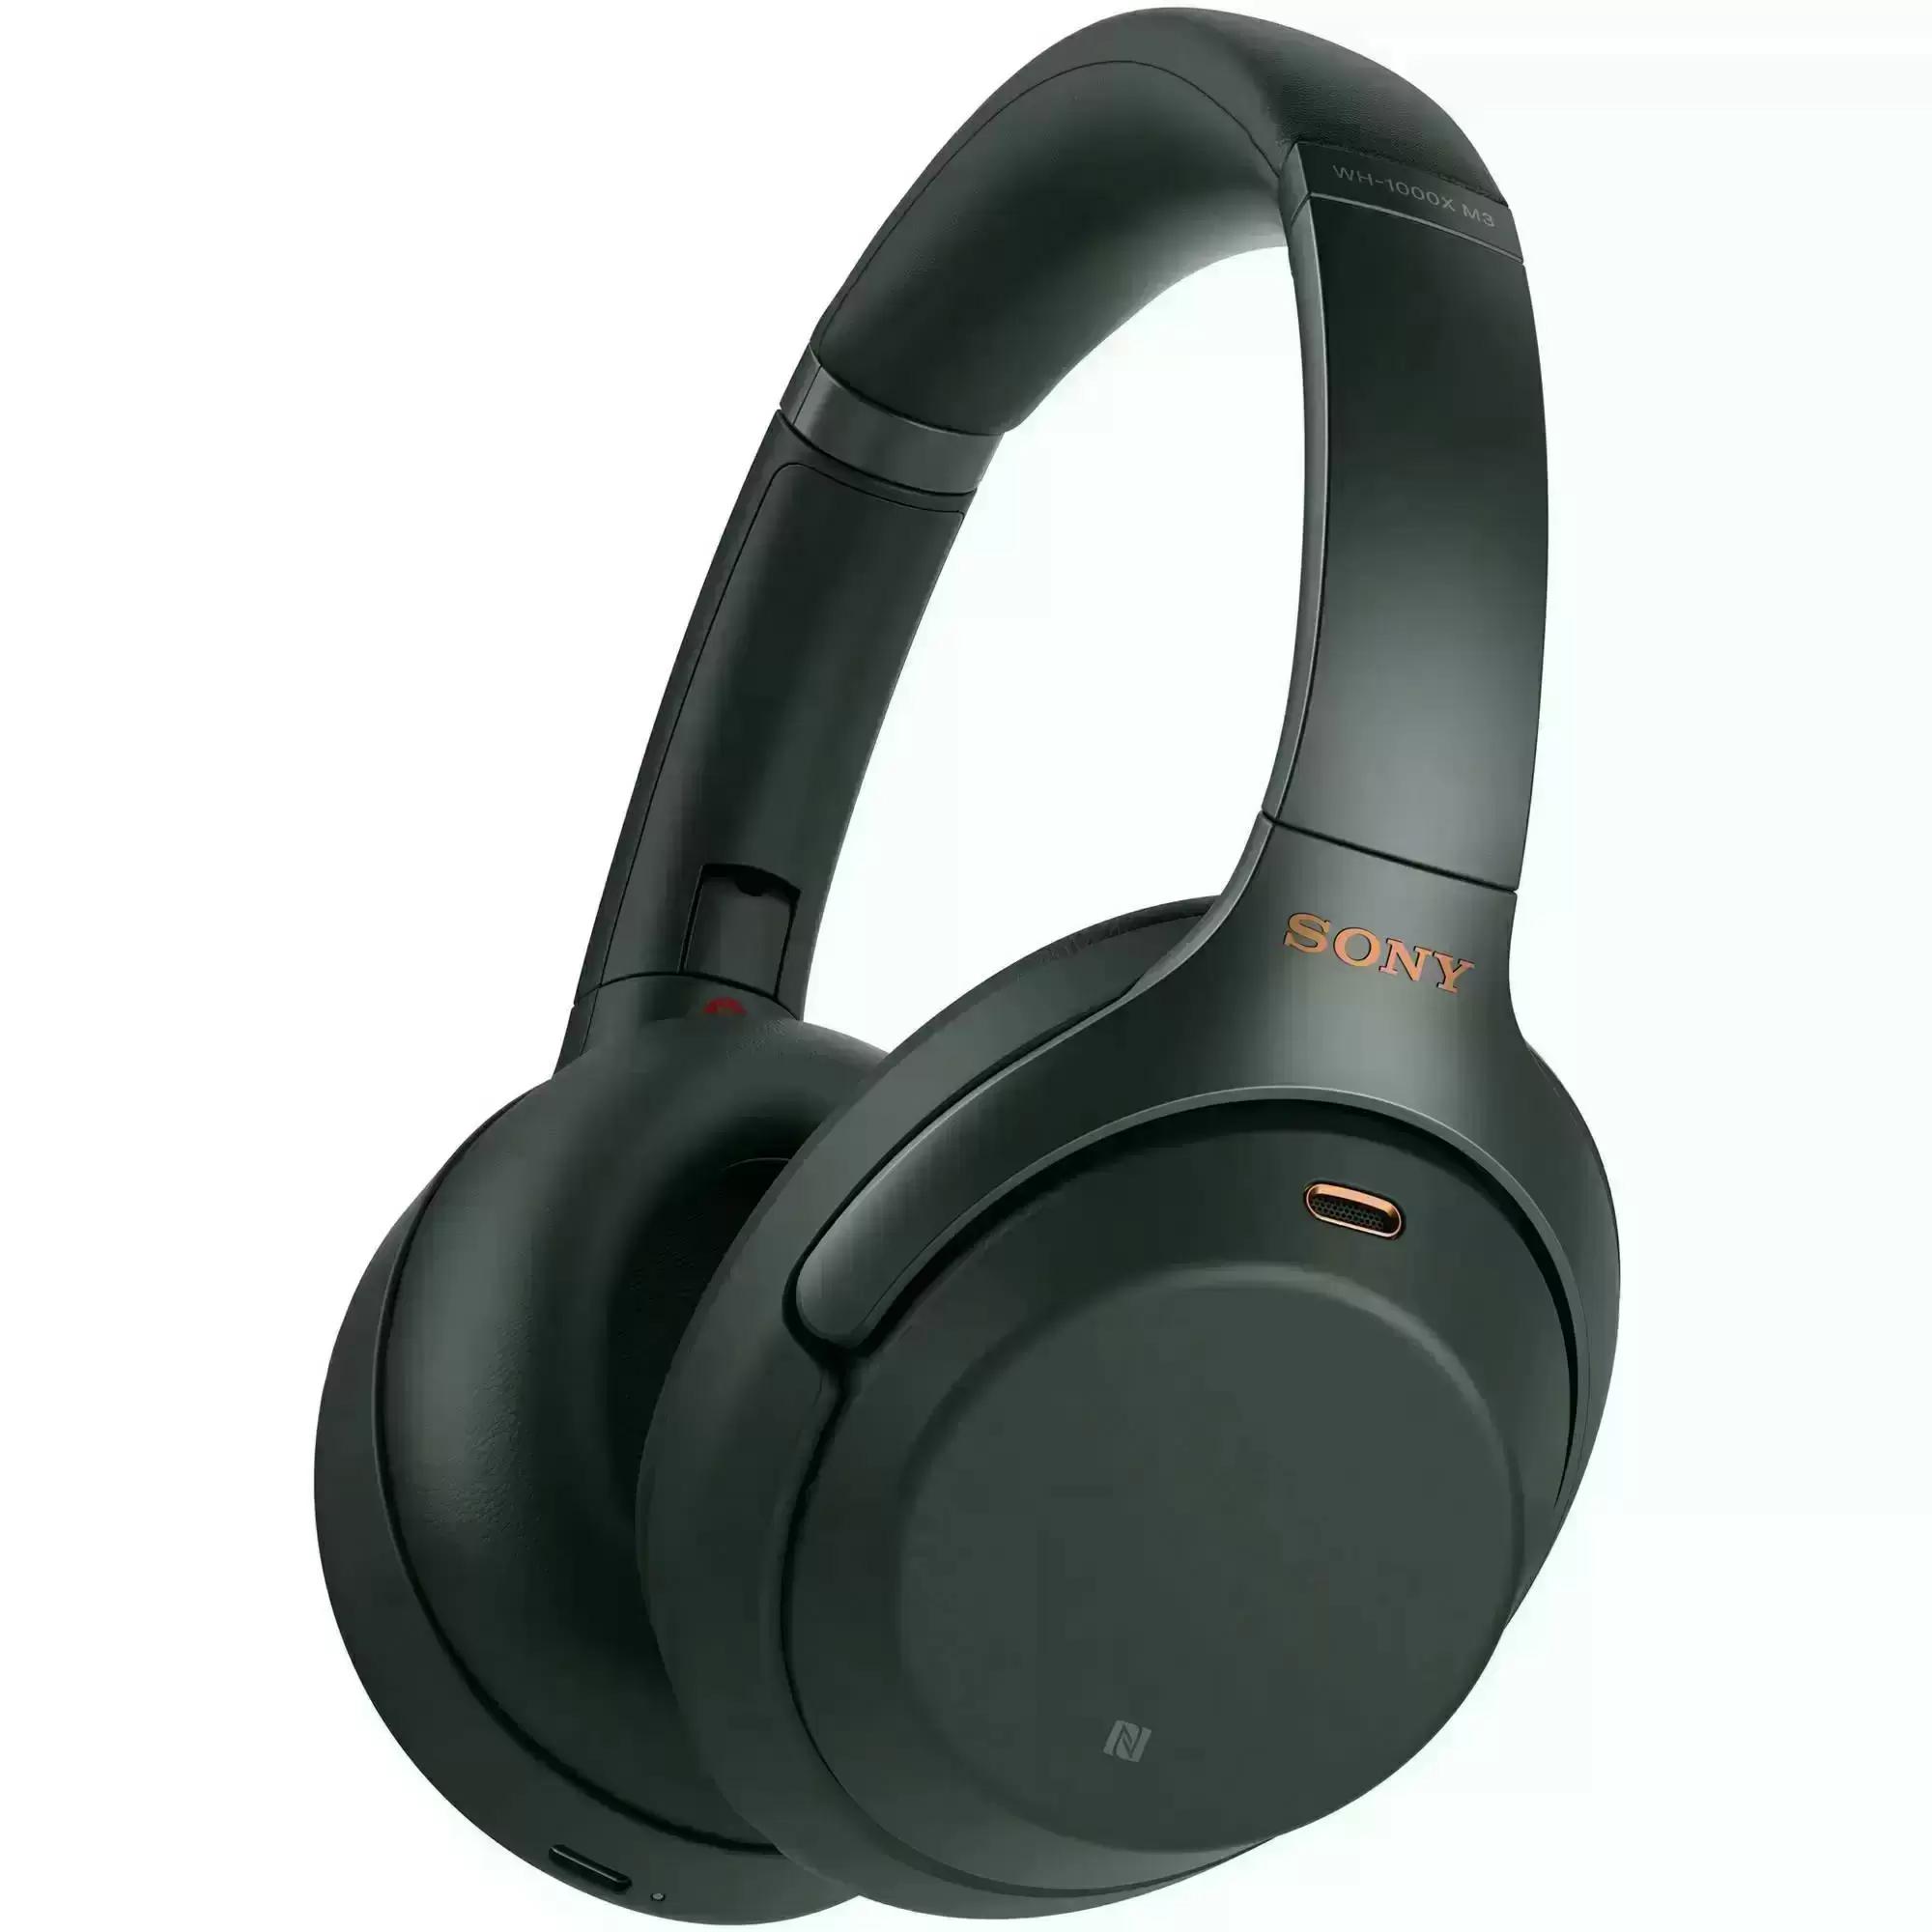 Sony WH1000XM3 Bluetooth Noise Canceling Headphones for $149.99 Shipped